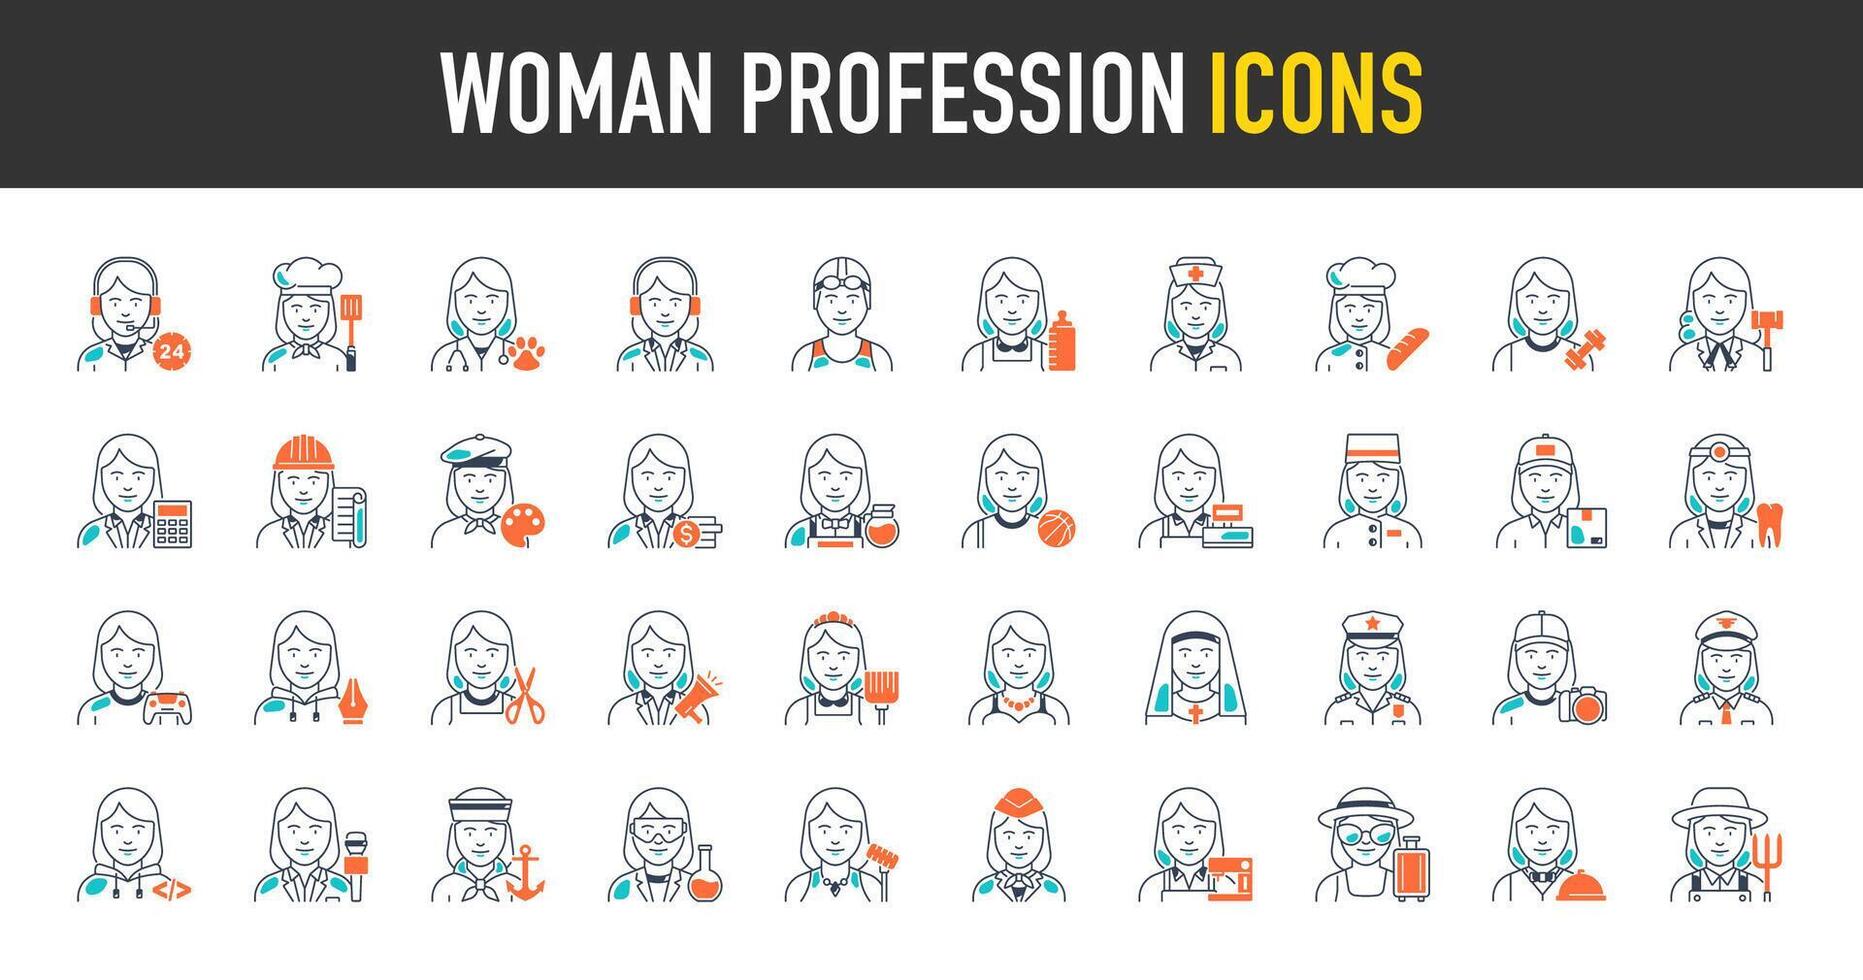 Women professions icons set. Such as occupations, workers, lawyer, chef, doctor, developer, scientist, farmer, entrepreneur, influencer, designer and more icon. Isolated illustrations icon. vector